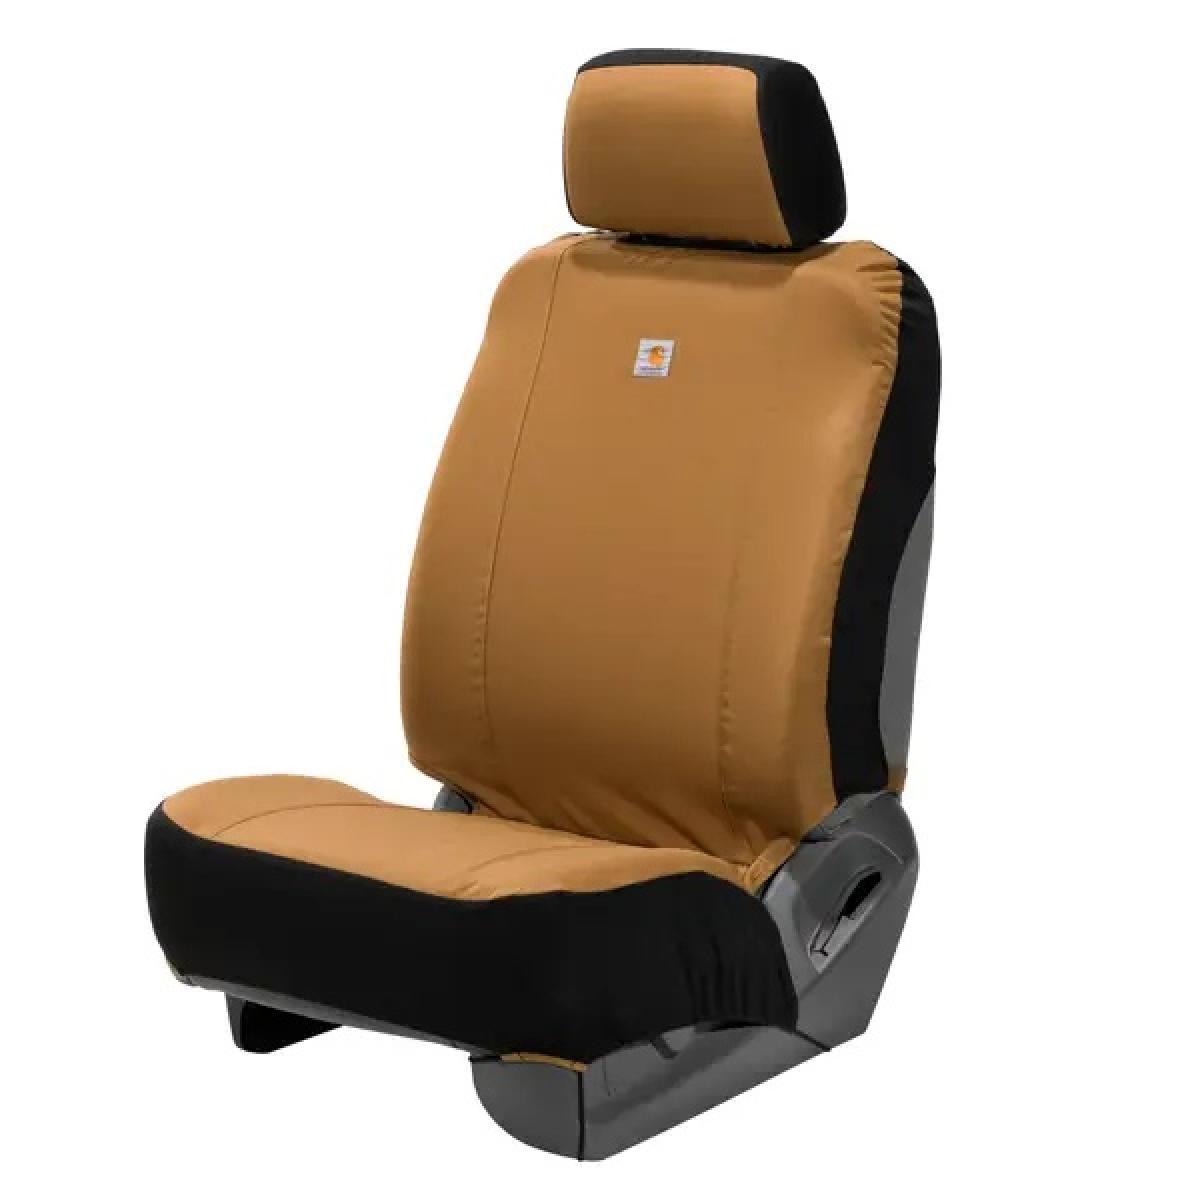 Carhartt Low Back Seat Cover